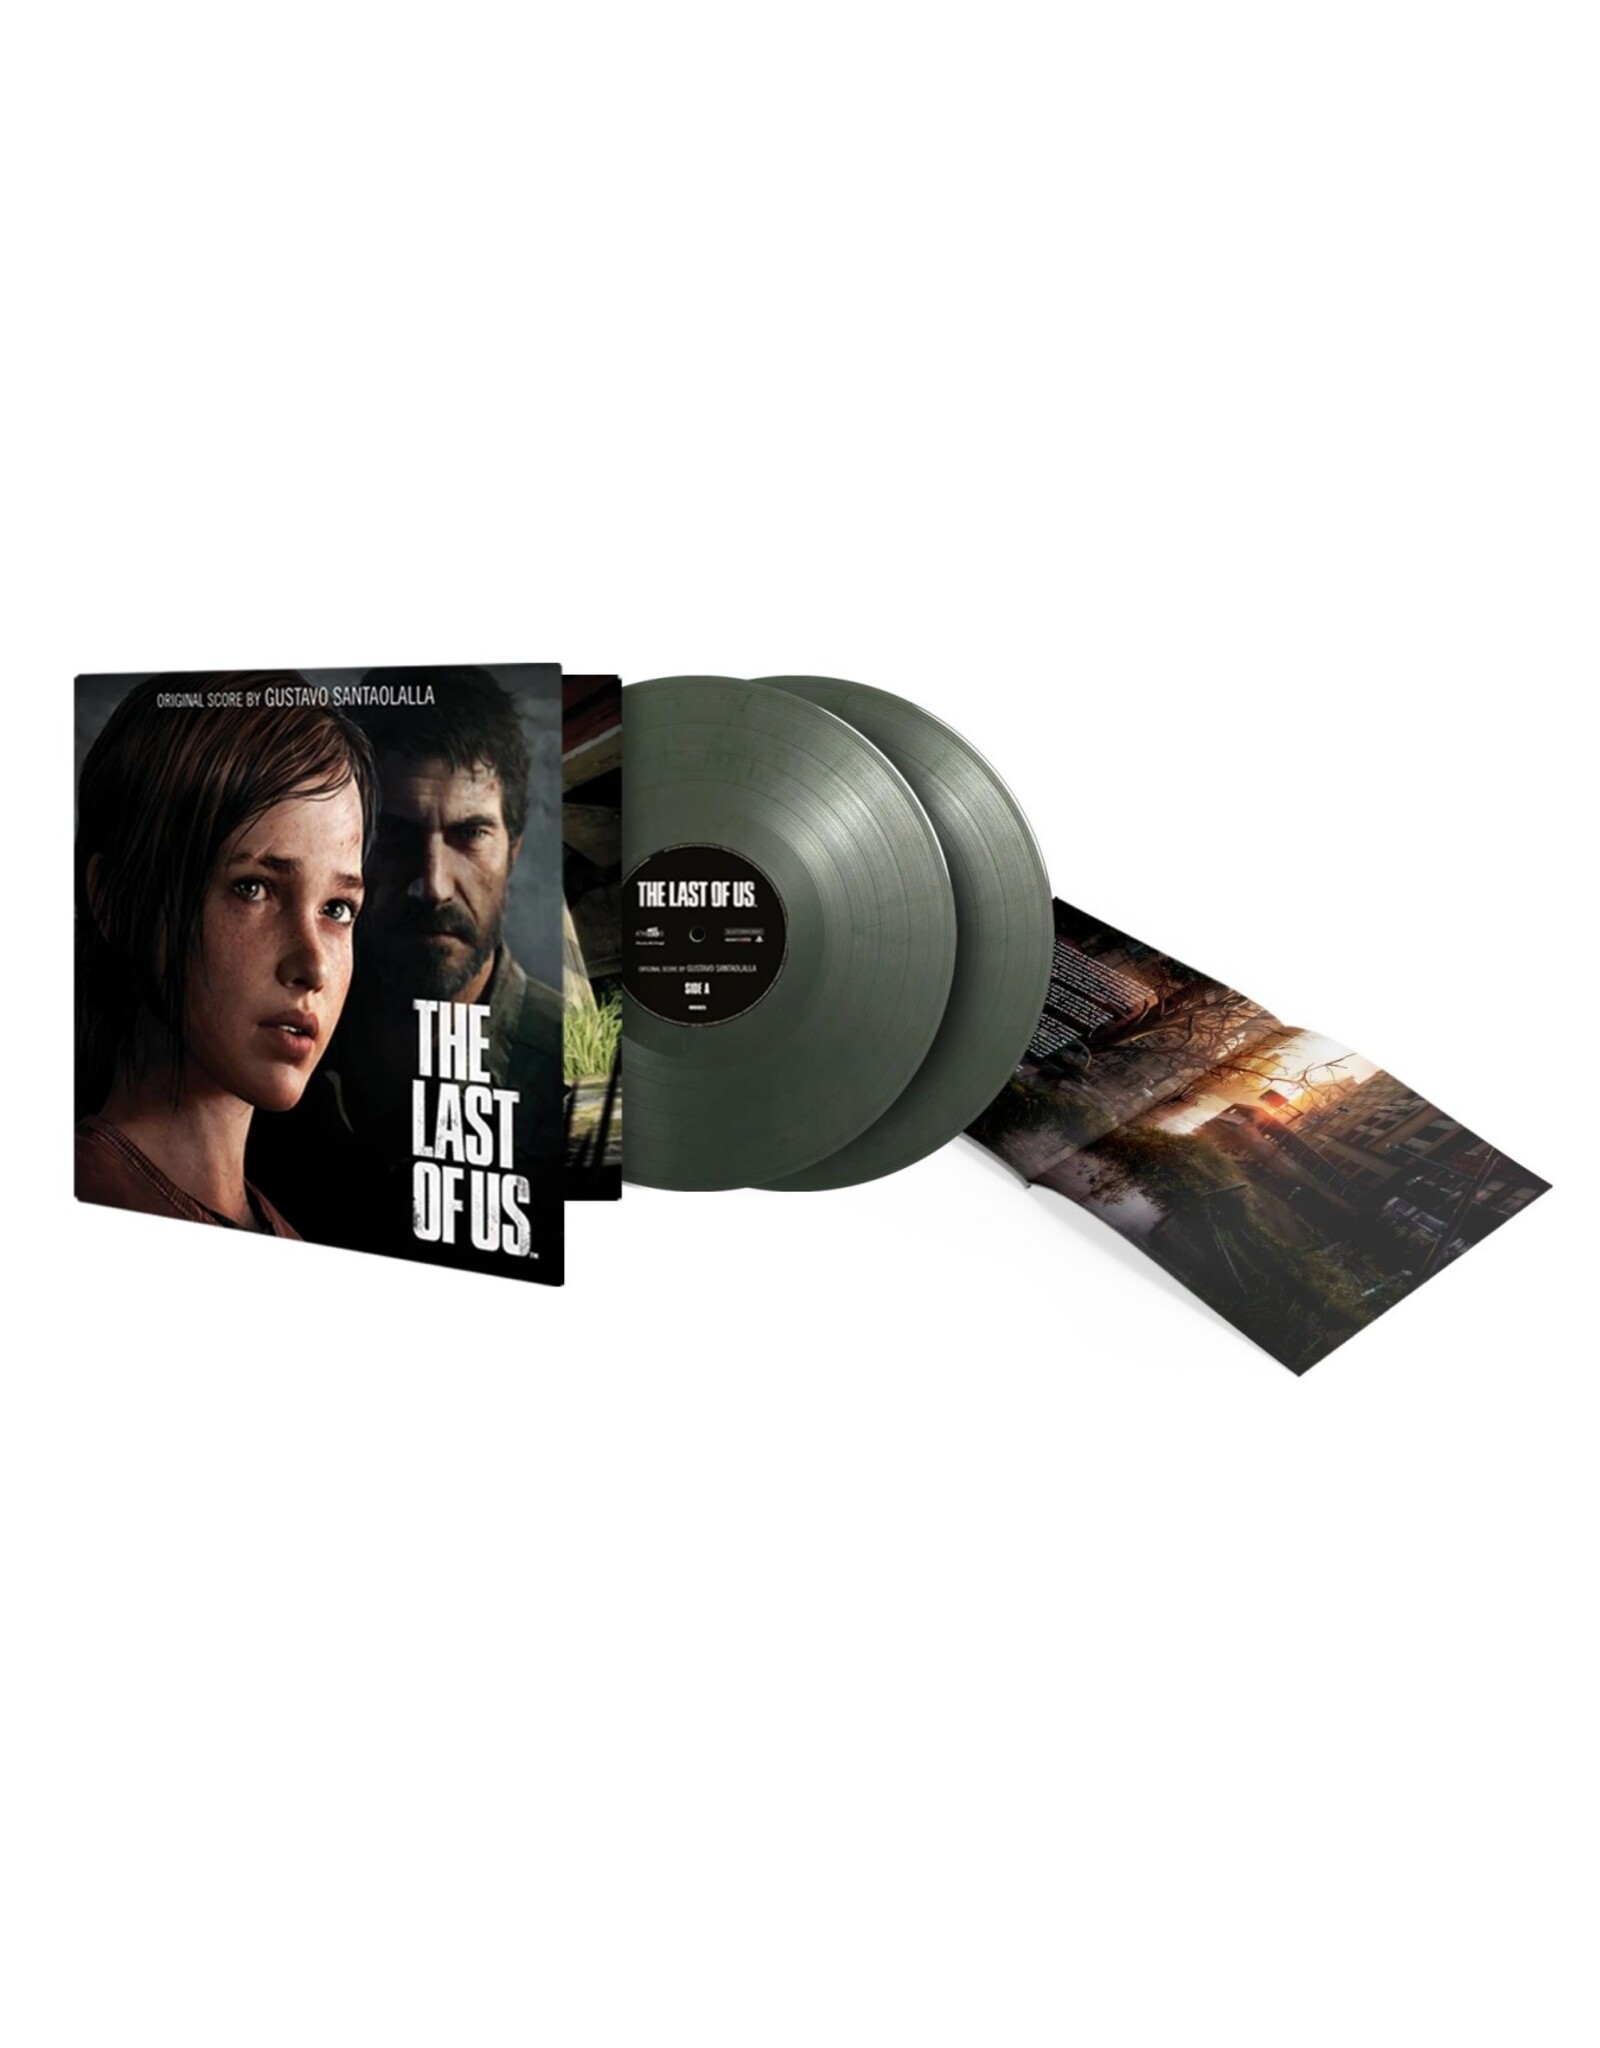 Gustavo Santaolalla - The Last Of Us (Music From The Video Game) [Green /Silver Vinyl]